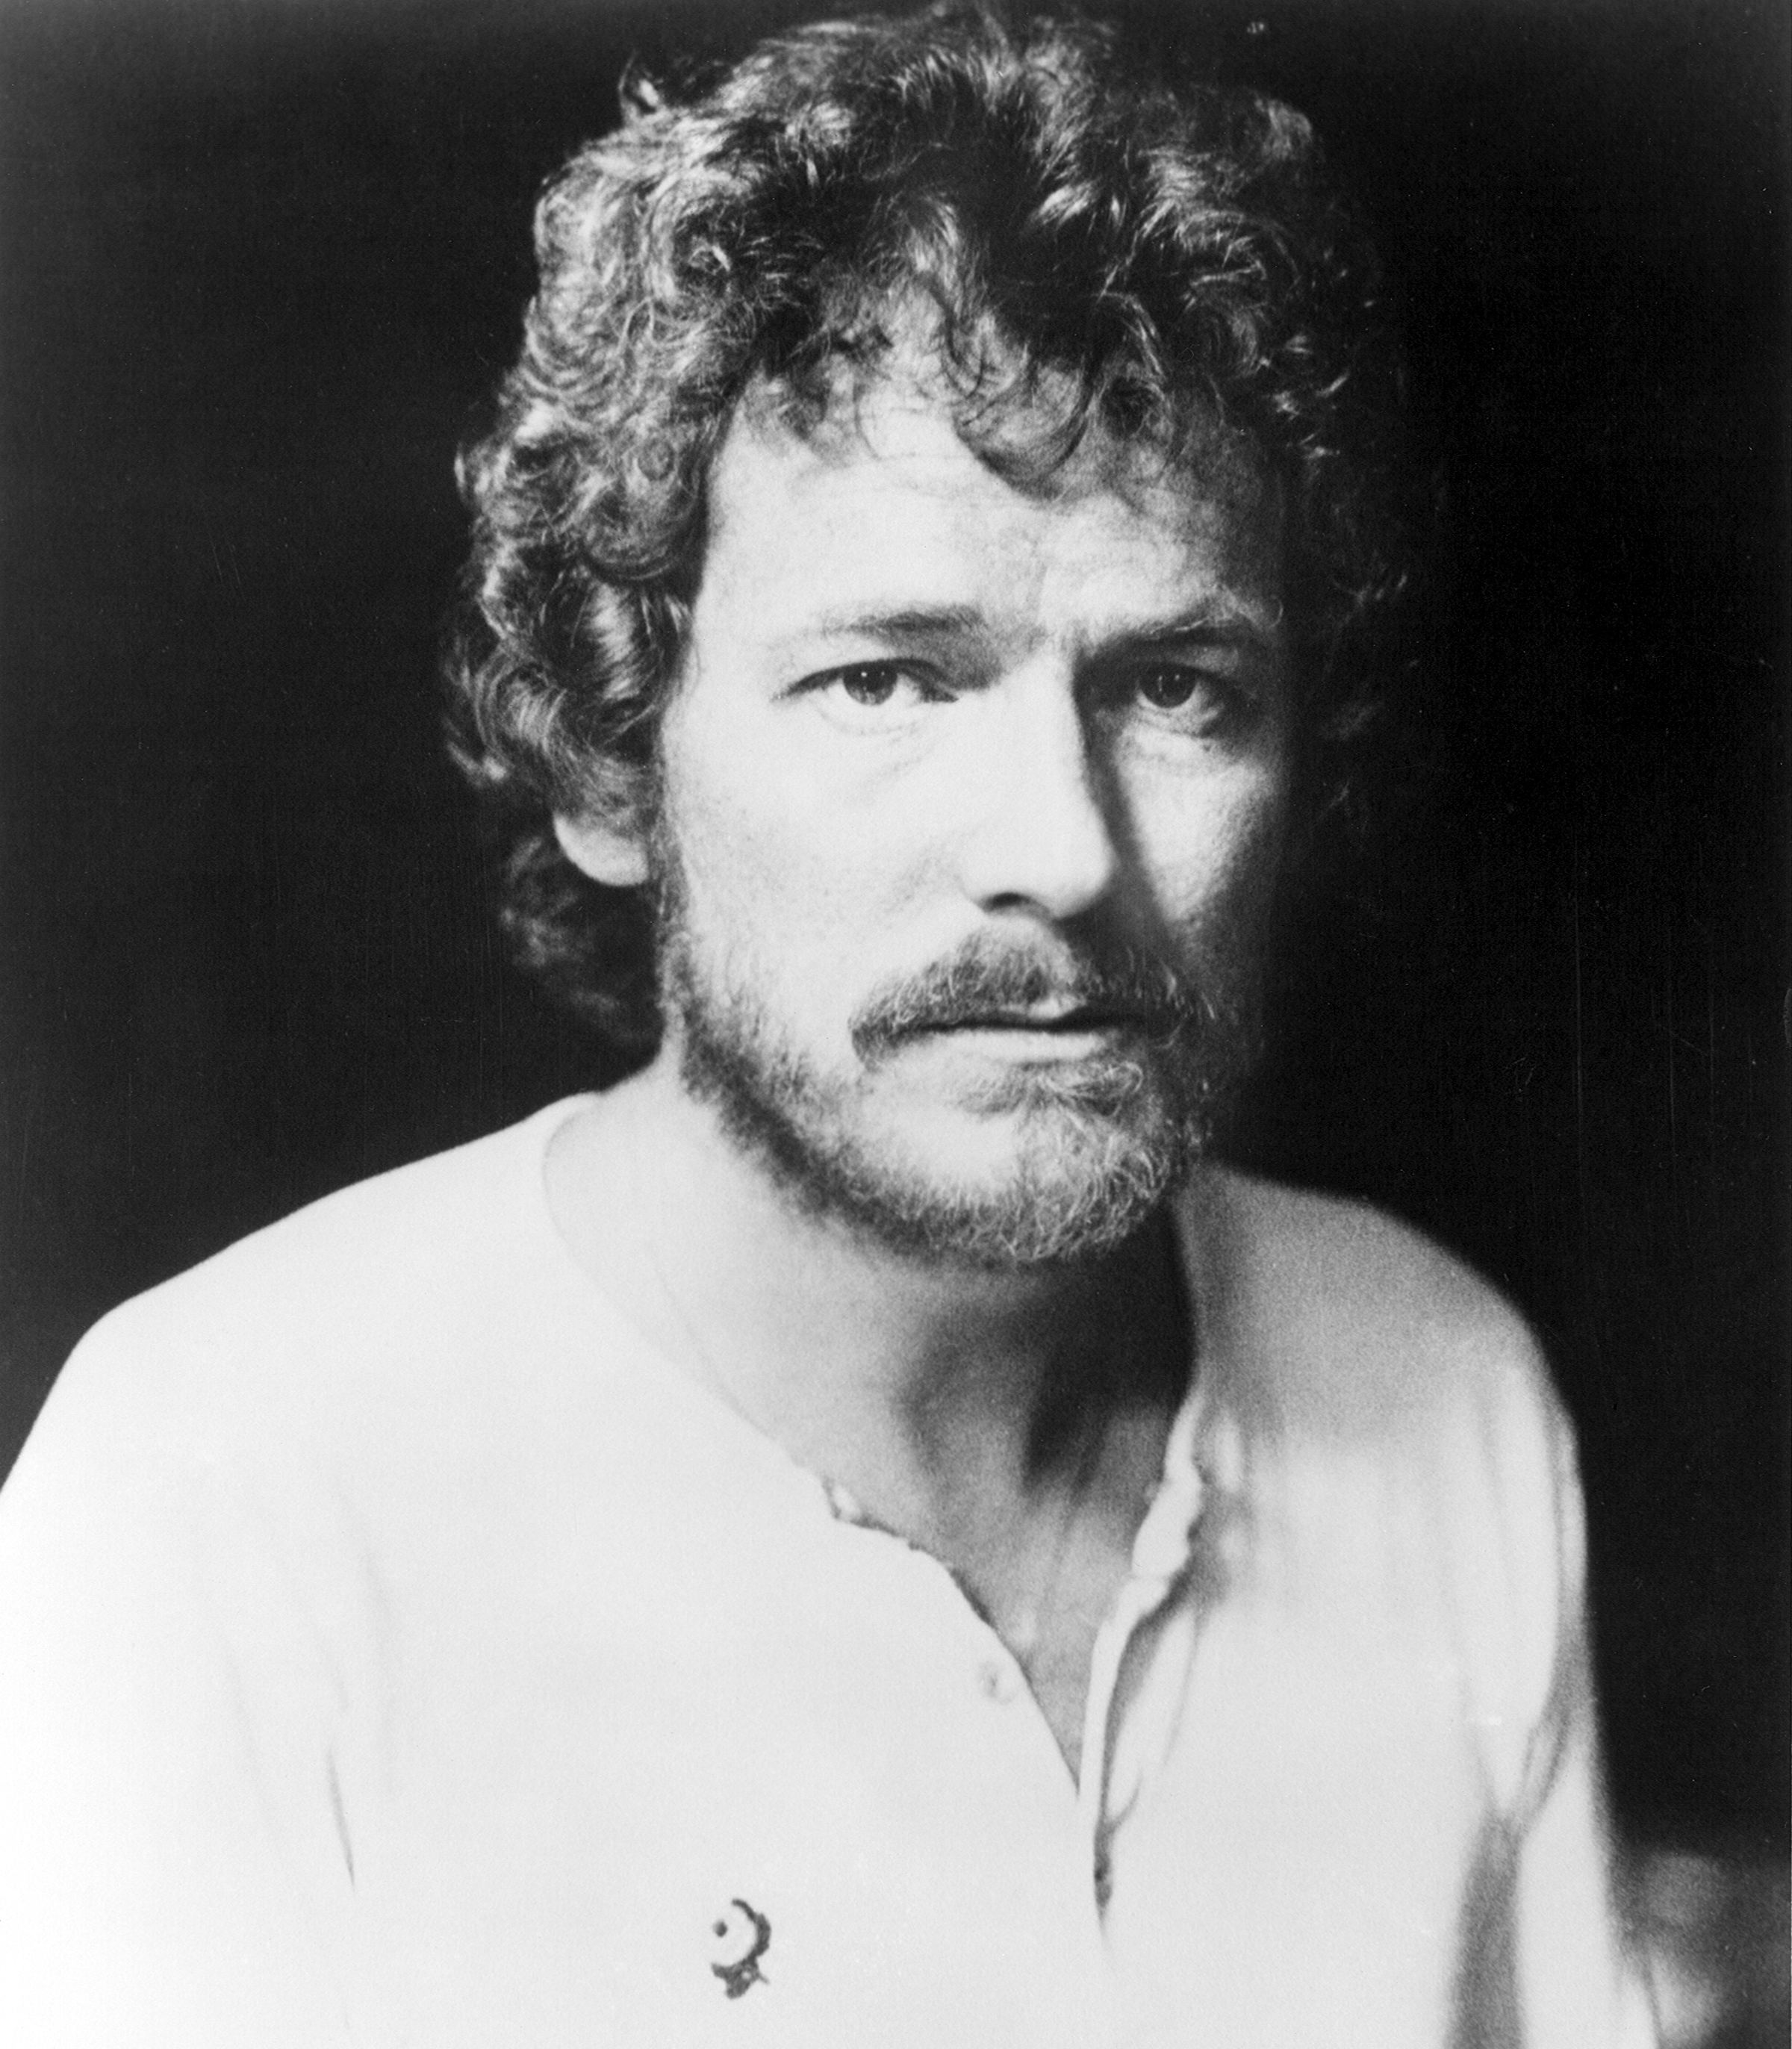 Gordon Lightfoot poses for a photo, circa 1974. | Source: Getty Images